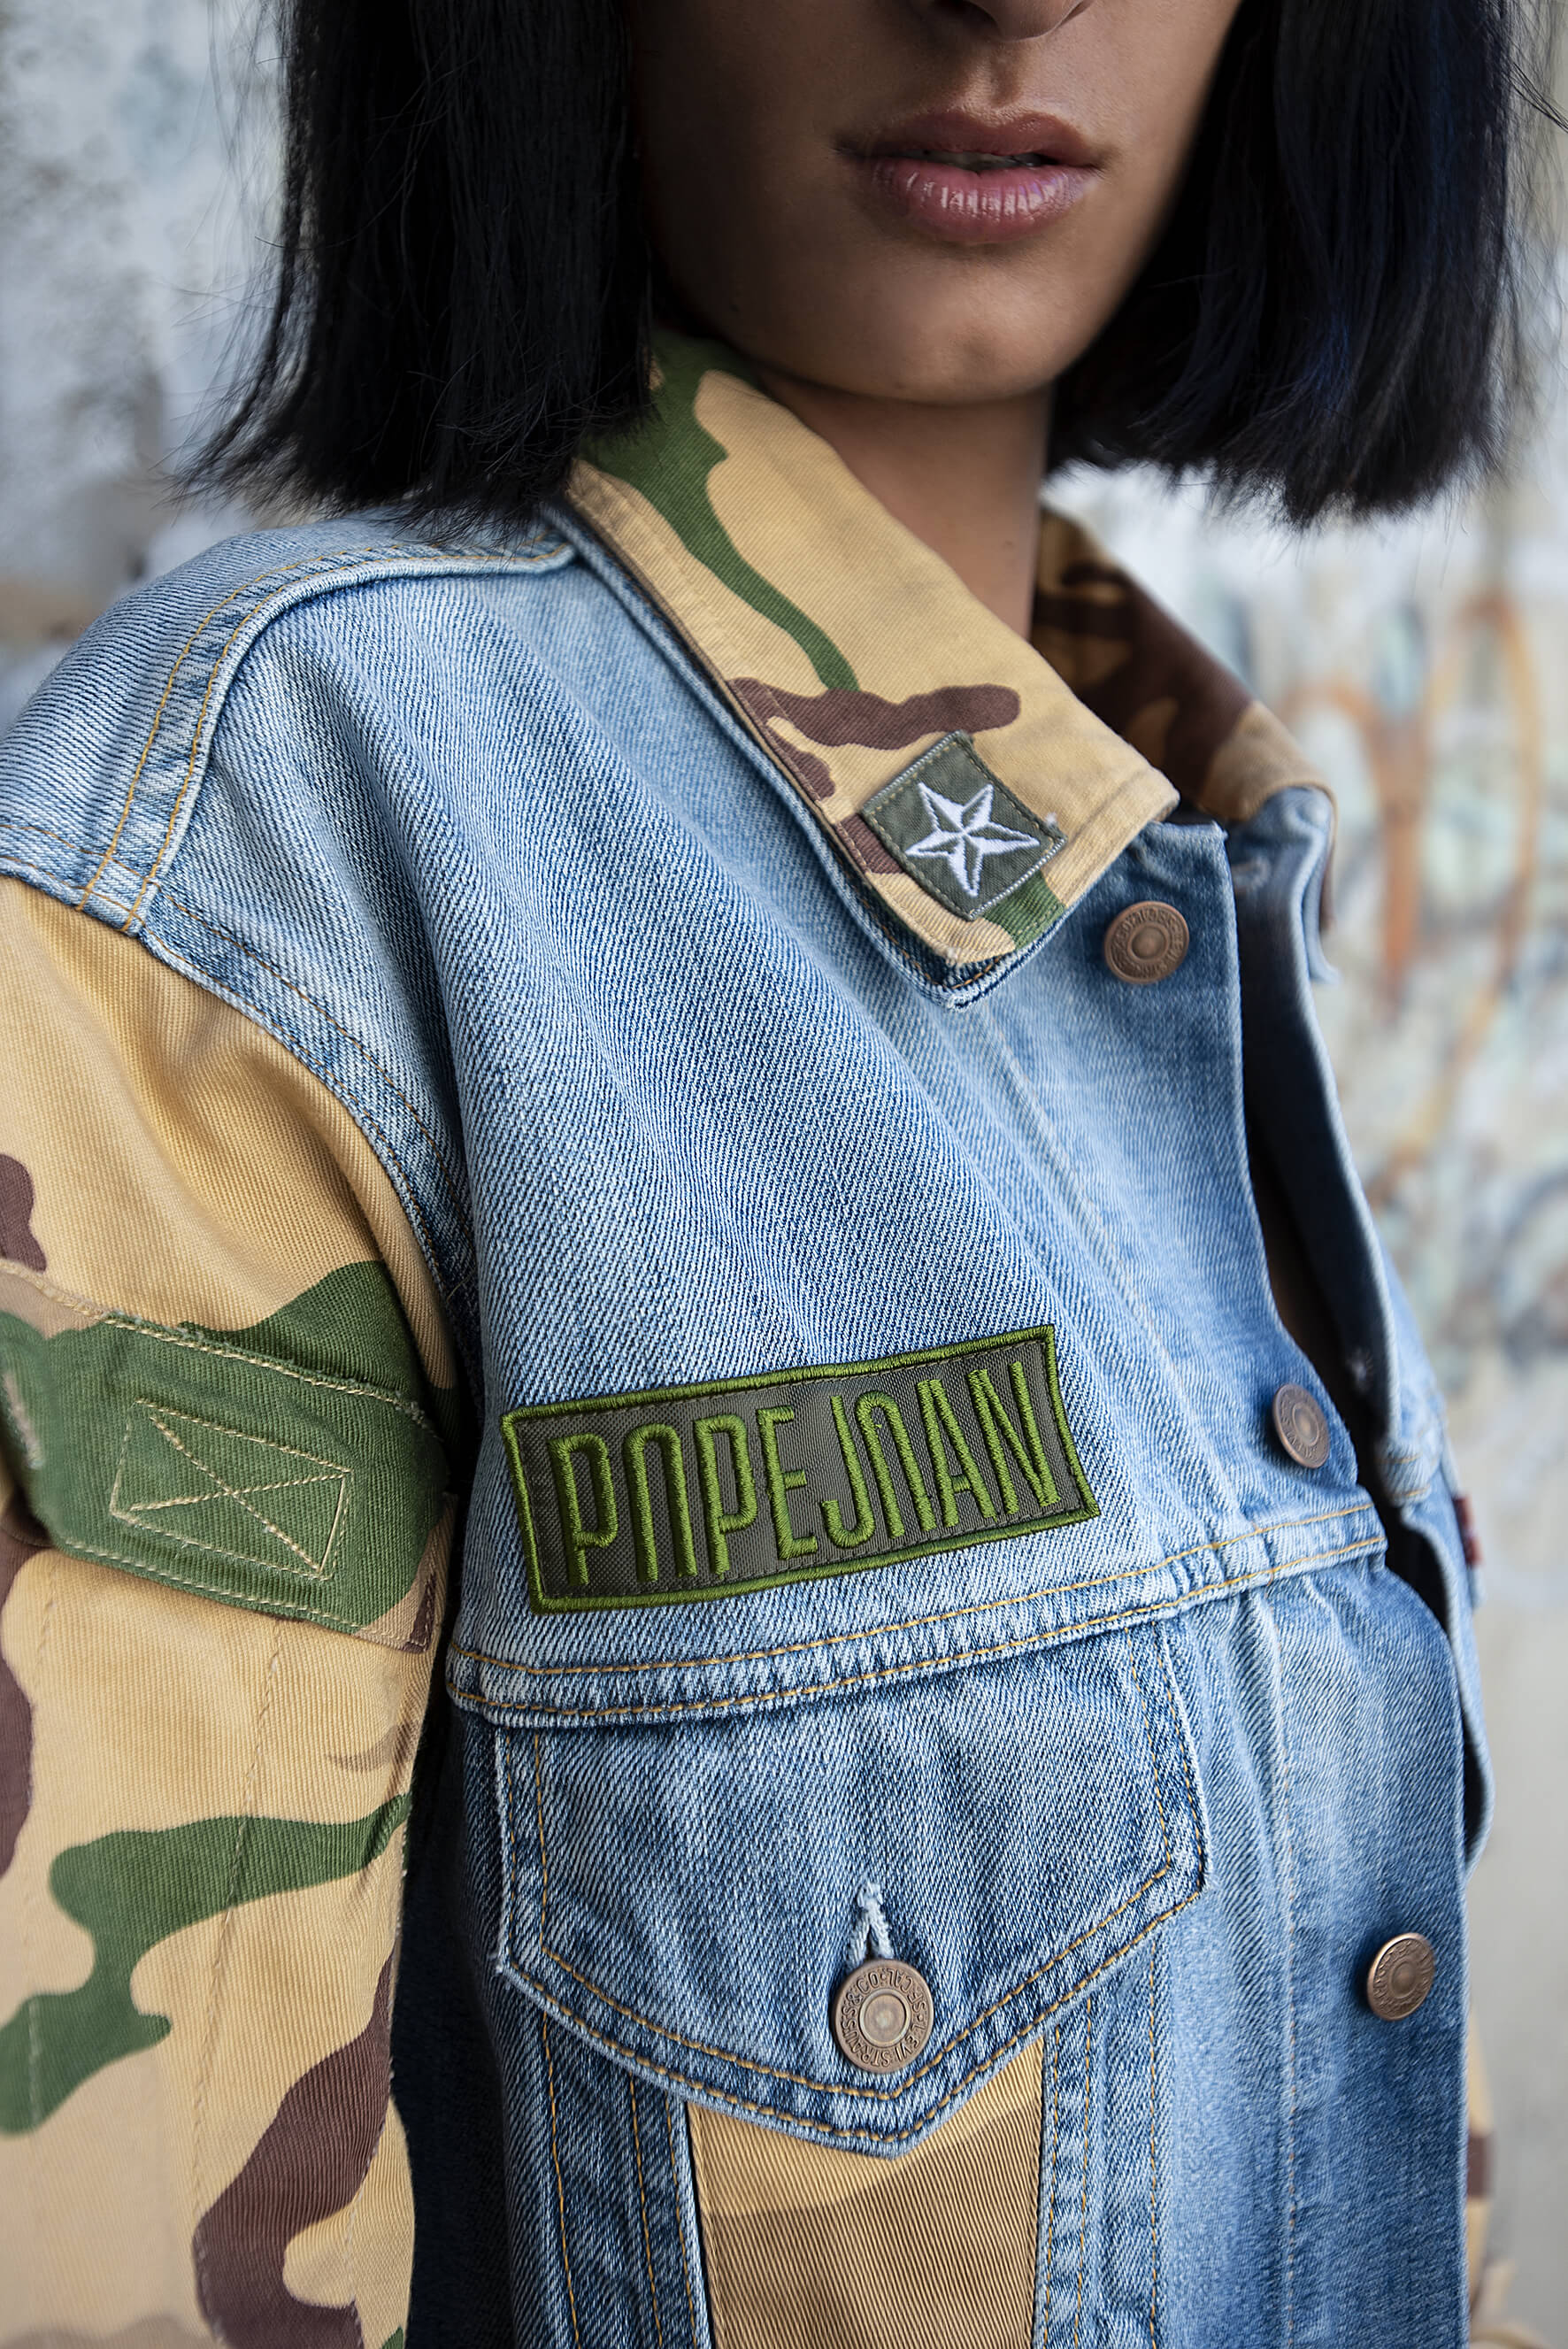 ➽ FORT WAYNE - Levi's oversized jeans jacket + military jacket: vintage  clothes for men and women revisited in upcycling, slow fashion brand, niche  clothing brand 